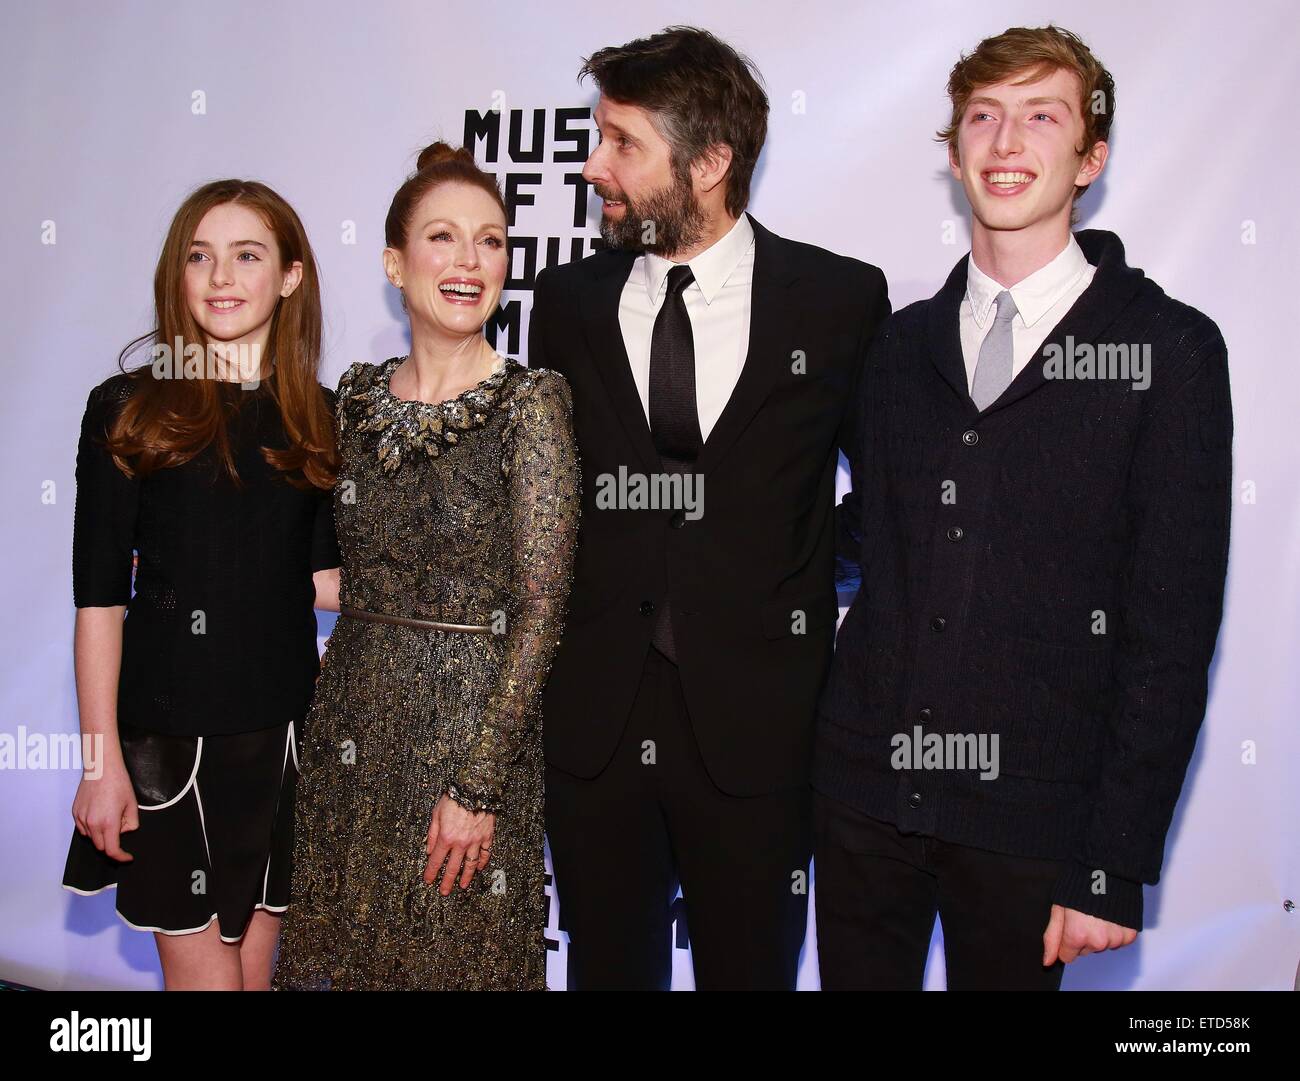 Museum of Moving Image Salutes Julianne Moore at 583 Park Avenue -  Arrivals  Featuring: Liv Freundlich, Julianne Moore, Bart Freundlich, Caleb Freundlich Where: New York, United States When: 21 Jan 2015 Credit: Joseph Marzullo/WENN.com Stock Photo